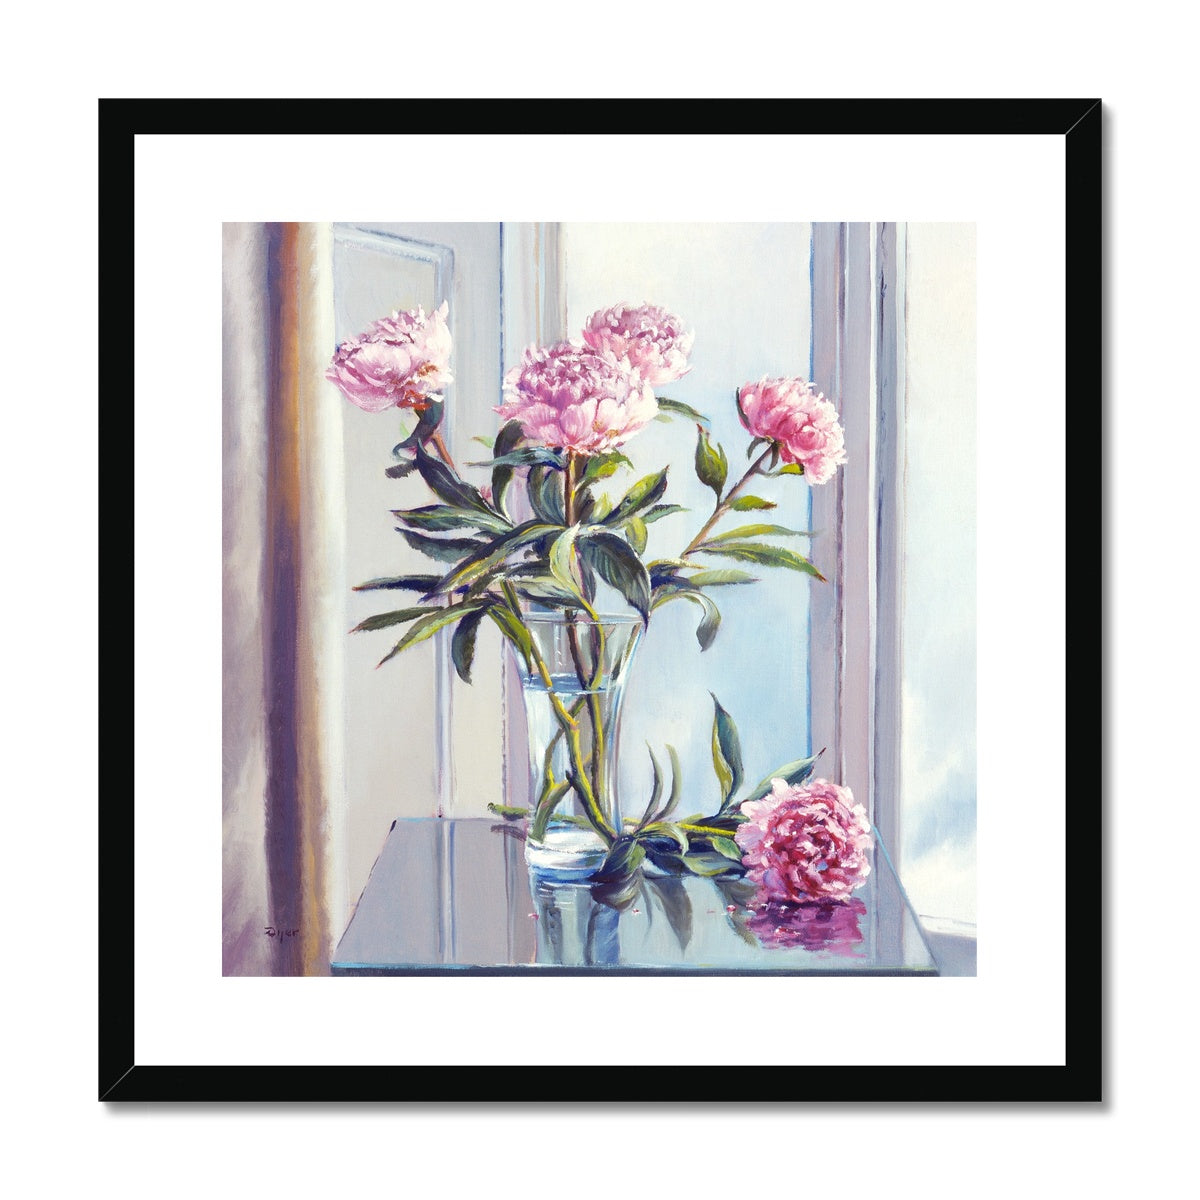 Ted Dyer Framed Open Edition Cornish Fine Art Print. &#39;Pink Peonies&#39;. Cornwall Art Gallery